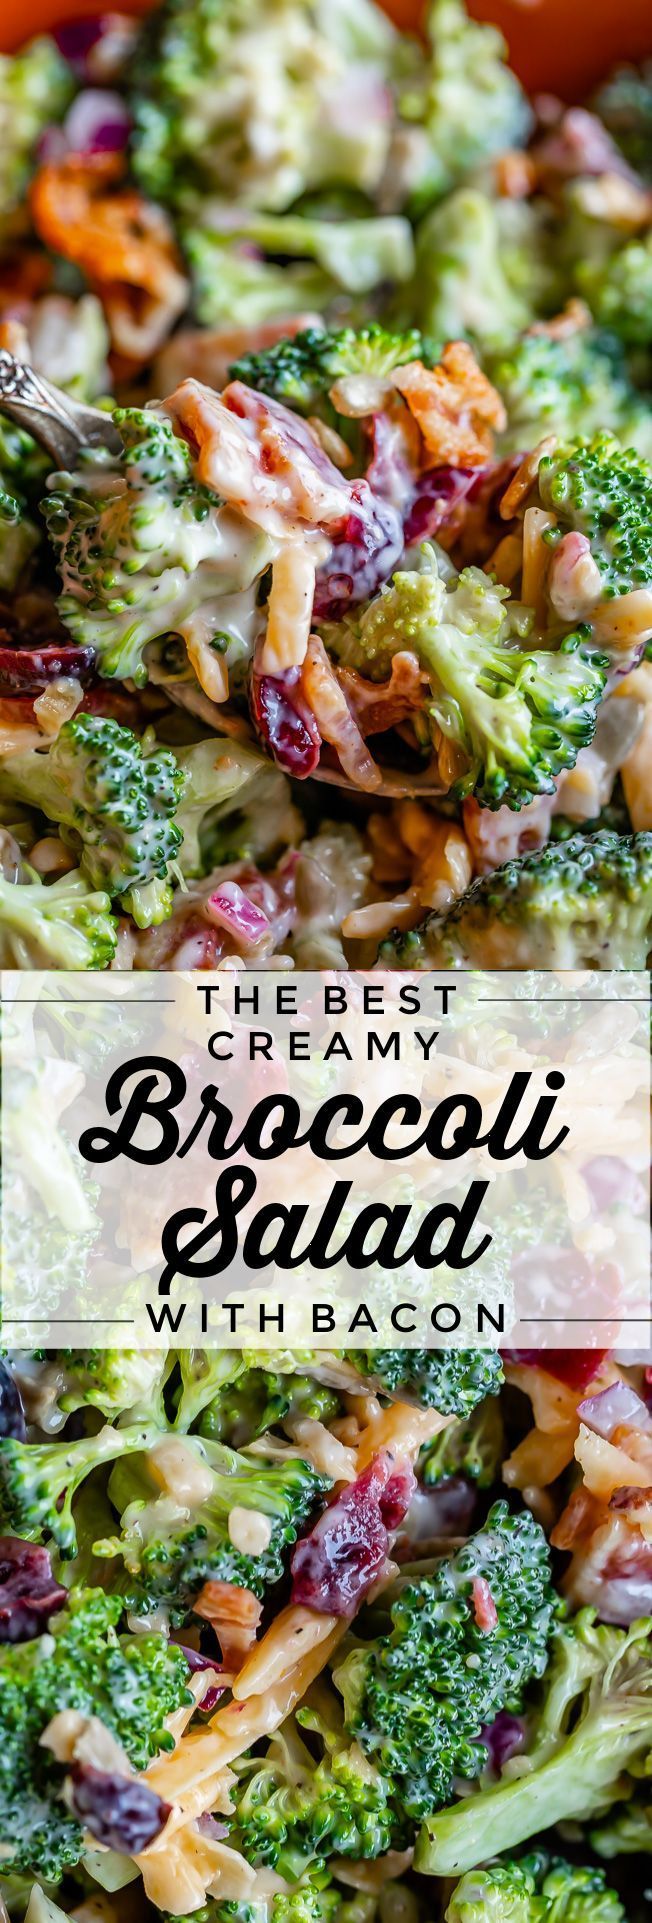 Easy Broccoli Bacon Salad from The Food Charlatan -   19 thanksgiving recipes side dishes healthy ideas